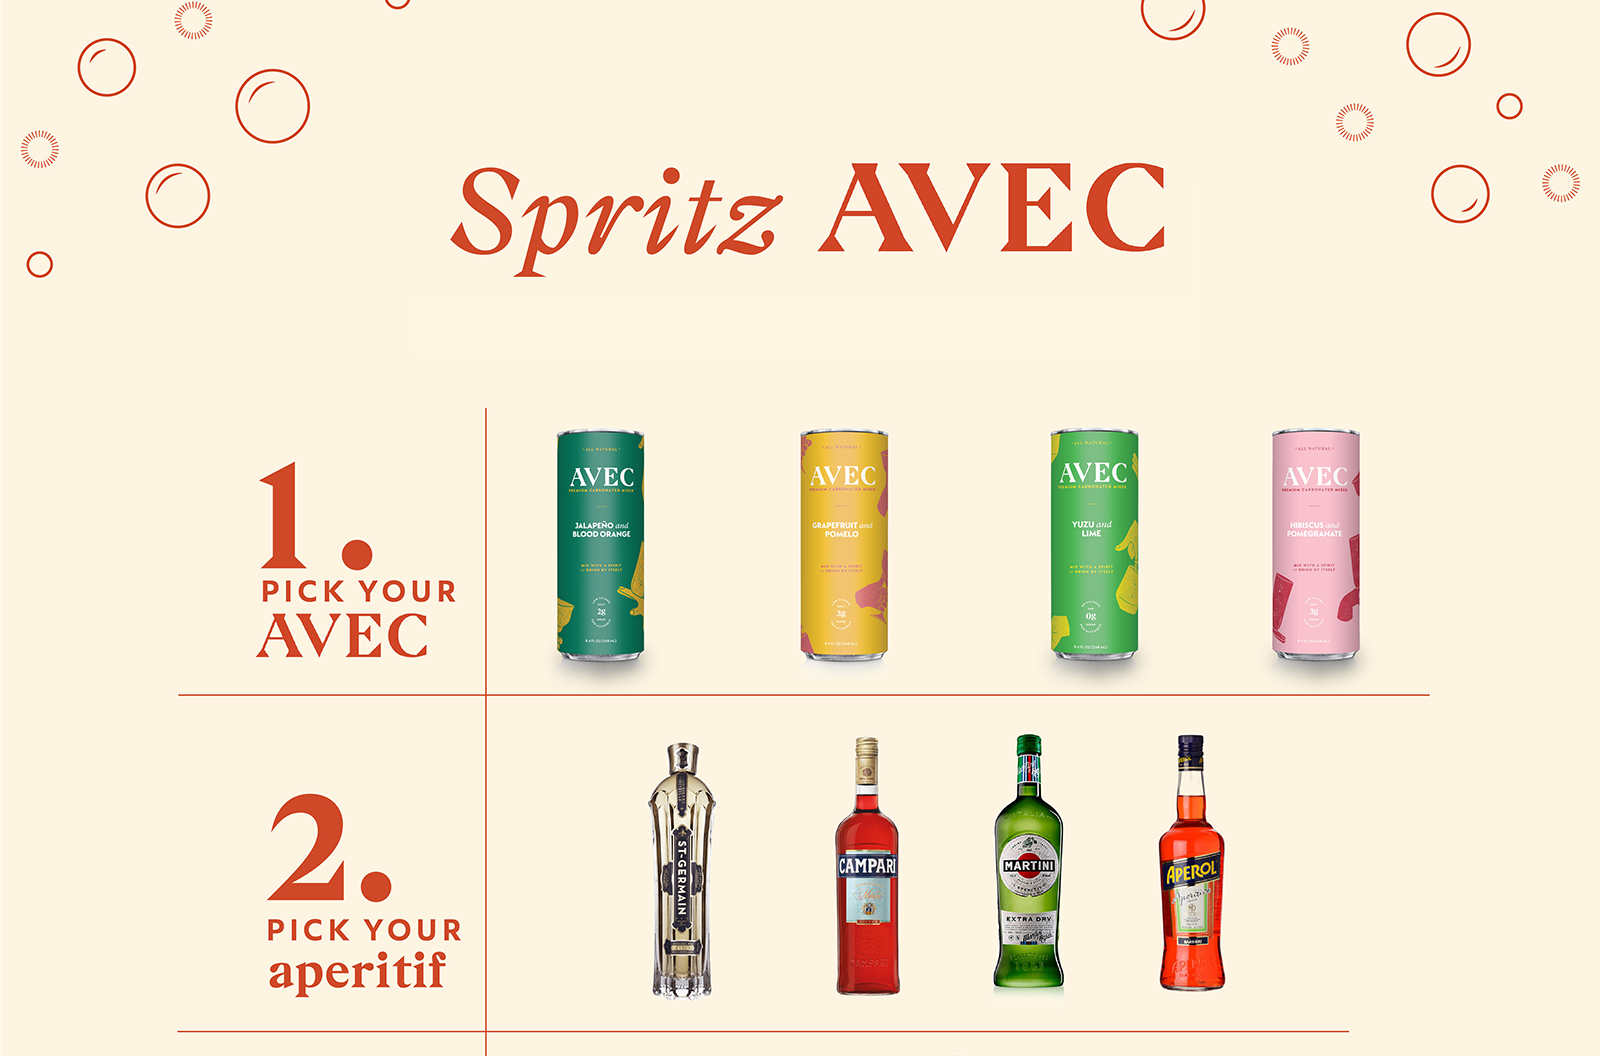 Feeling Spritzy: 5 Fun Facts about the Spritz